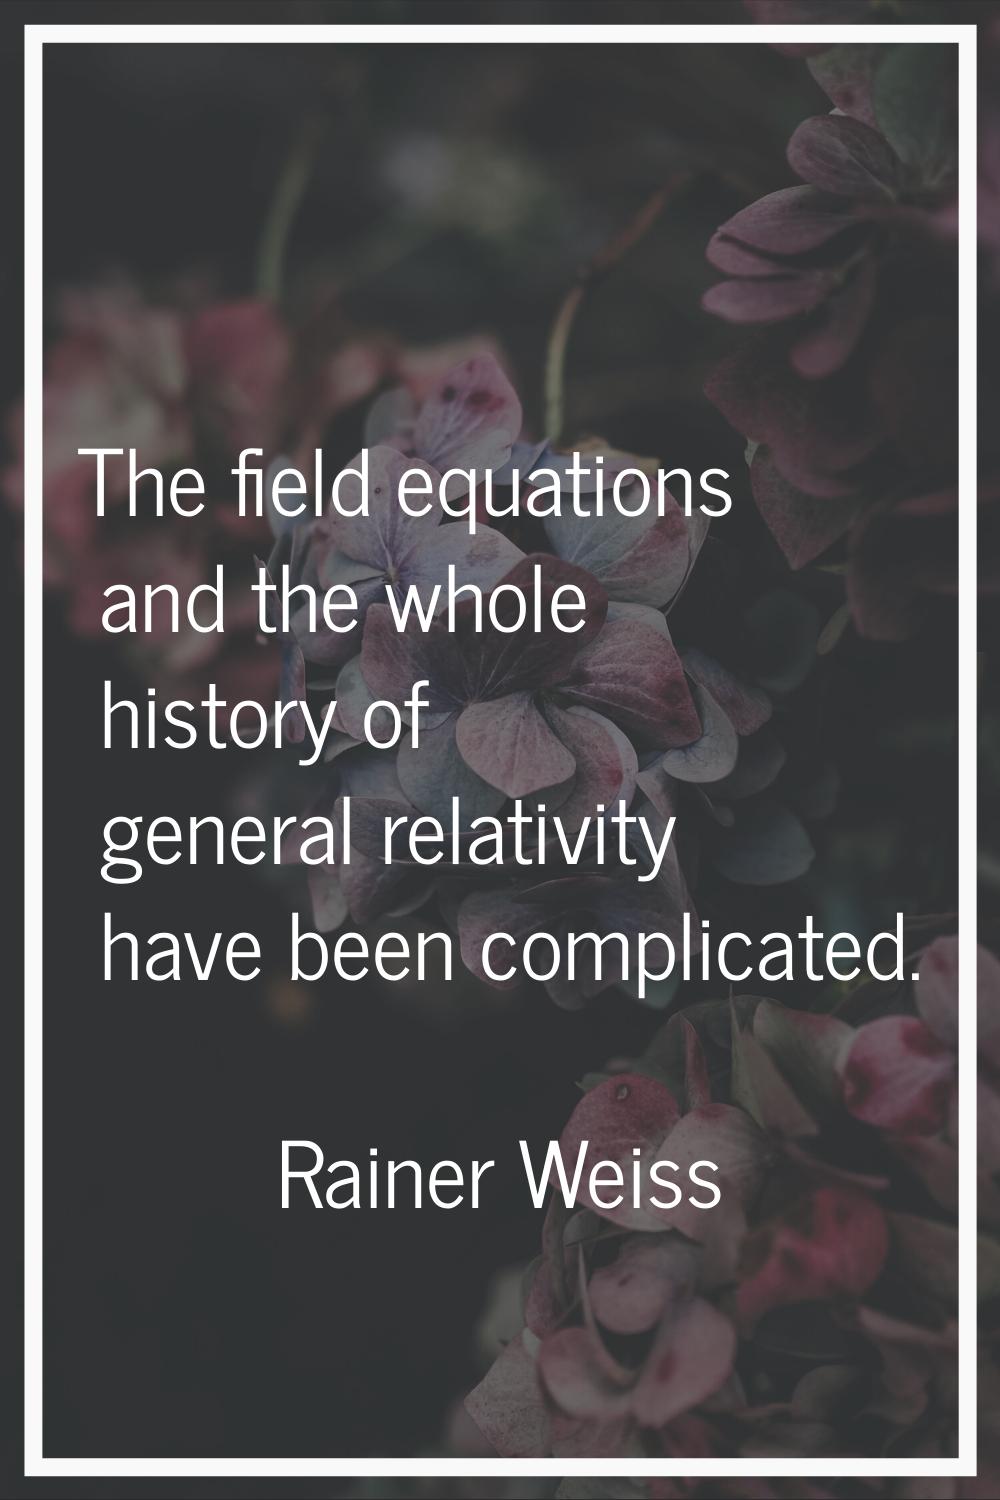 The field equations and the whole history of general relativity have been complicated.